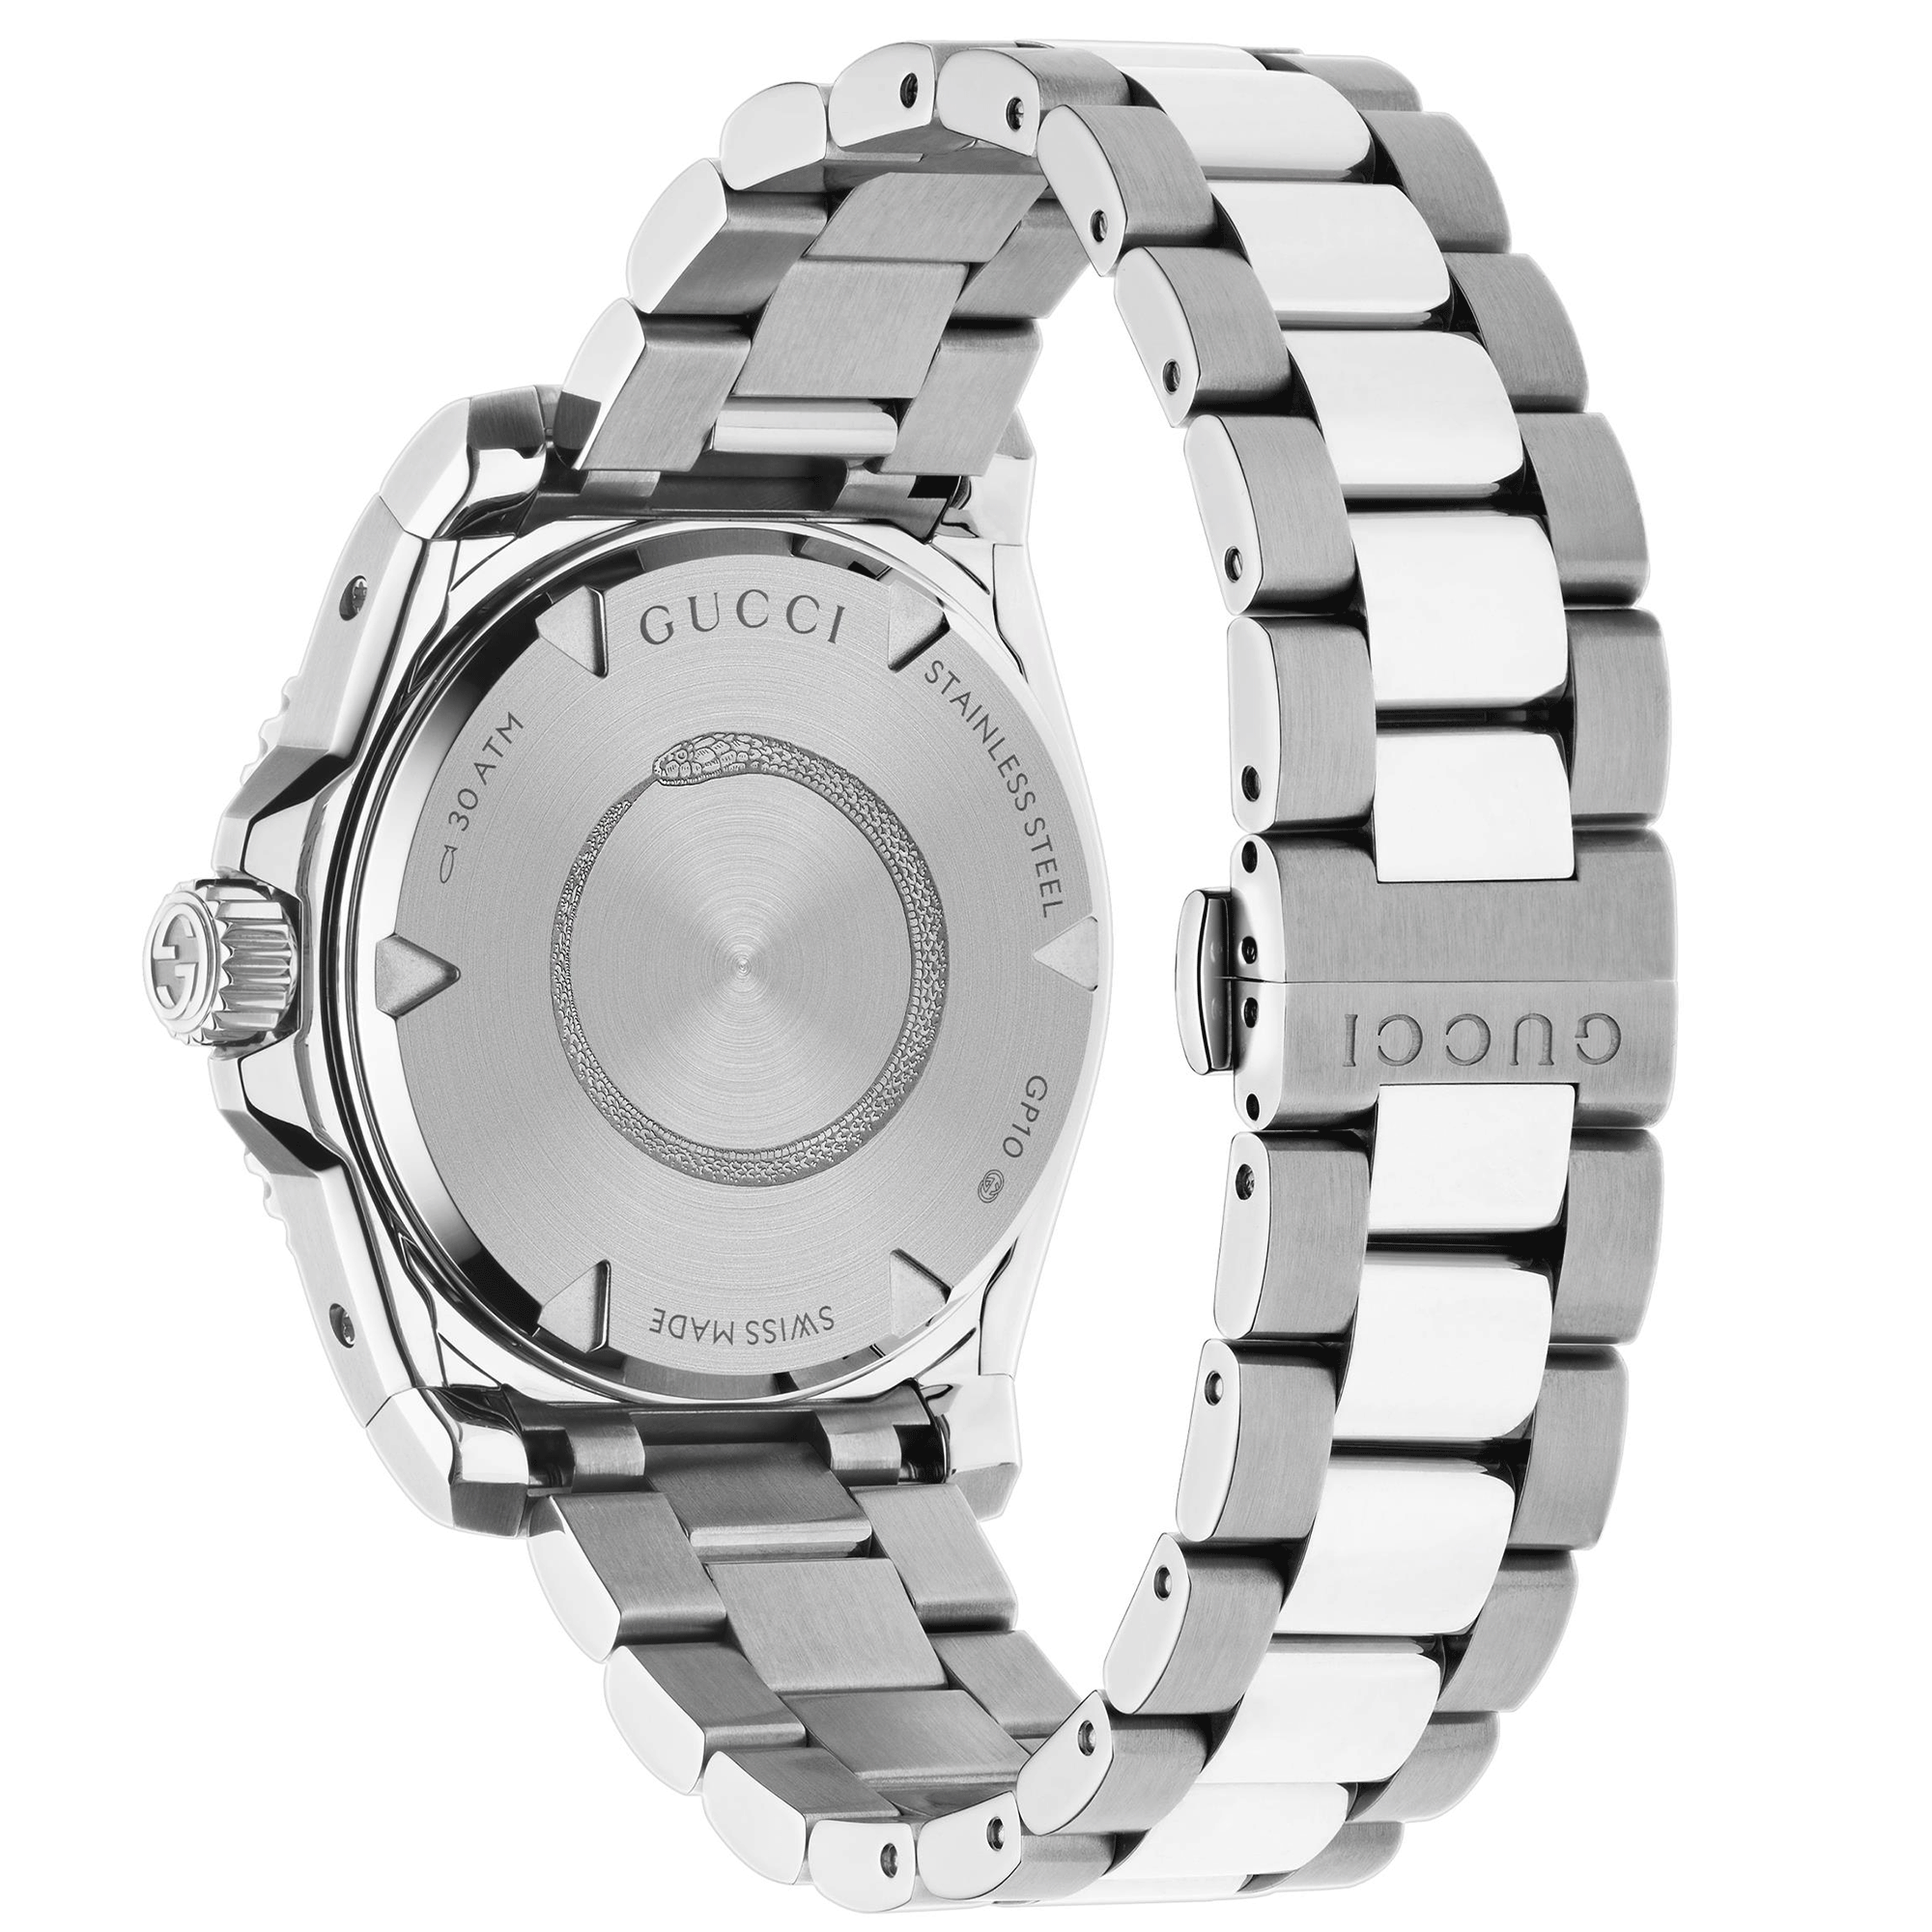 Gucci Dive 40mm Stainless Steel Automatic Watch With A Silver Dial & Gold Bezel